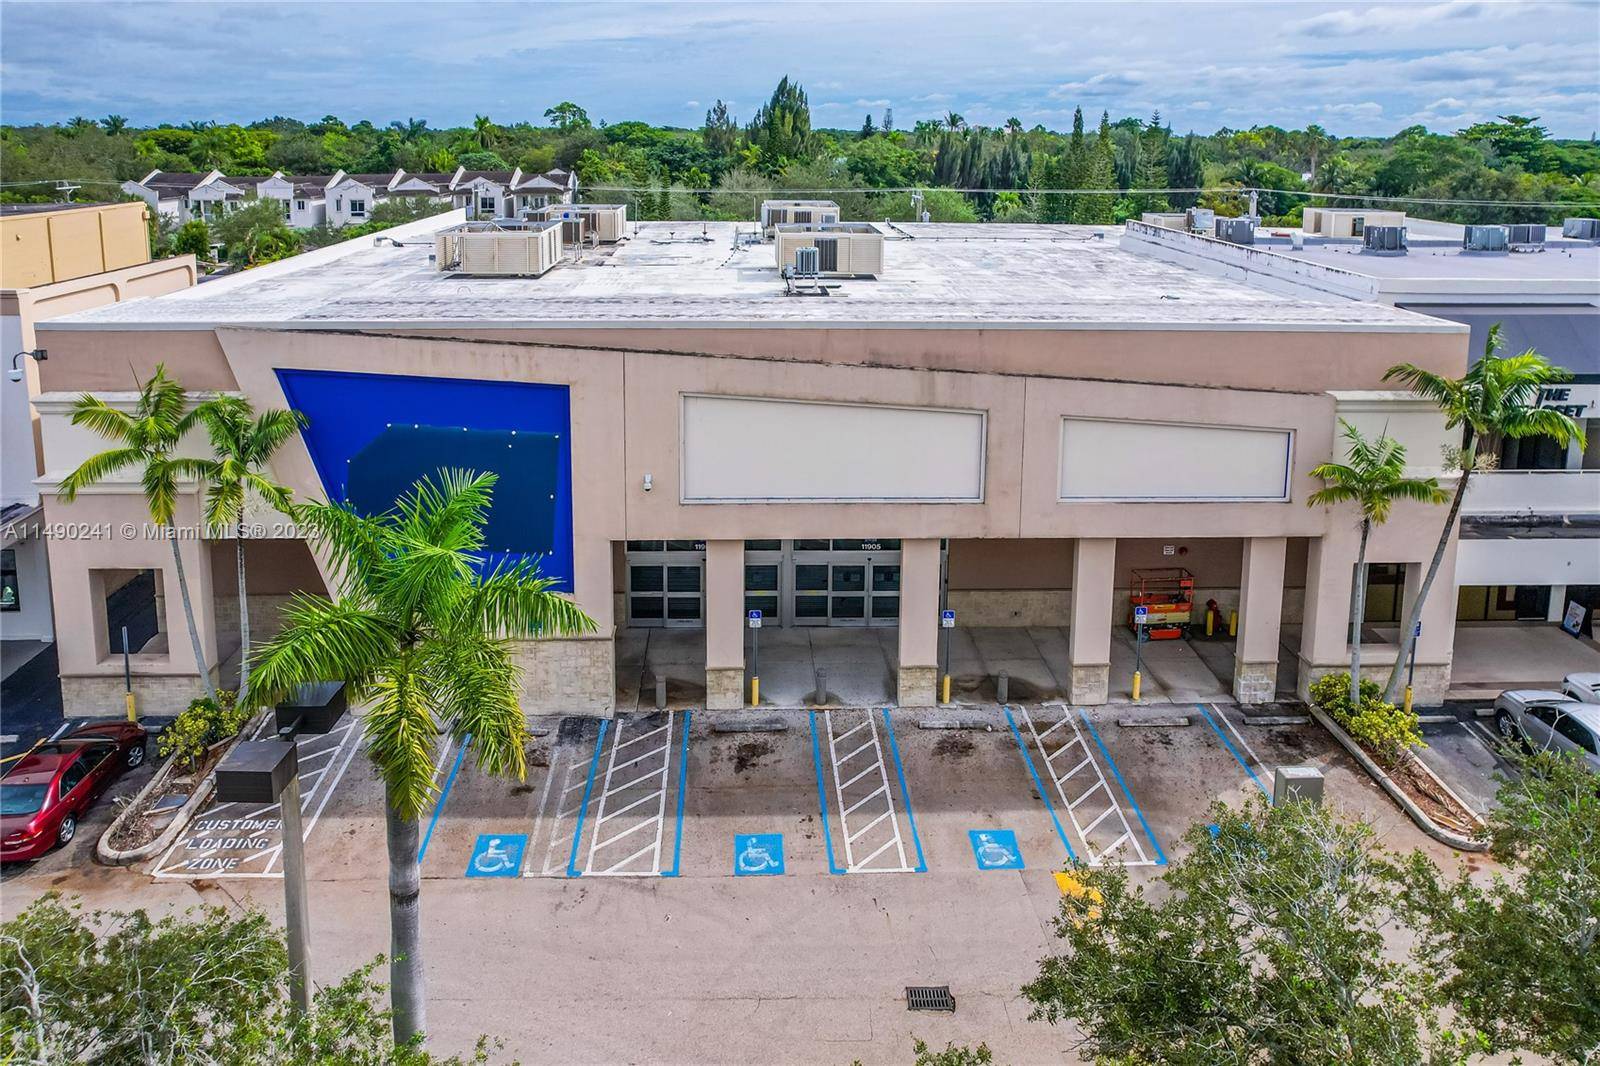 Remarkable opportunity to acquire a retail store property in prime location in Pinecrest.